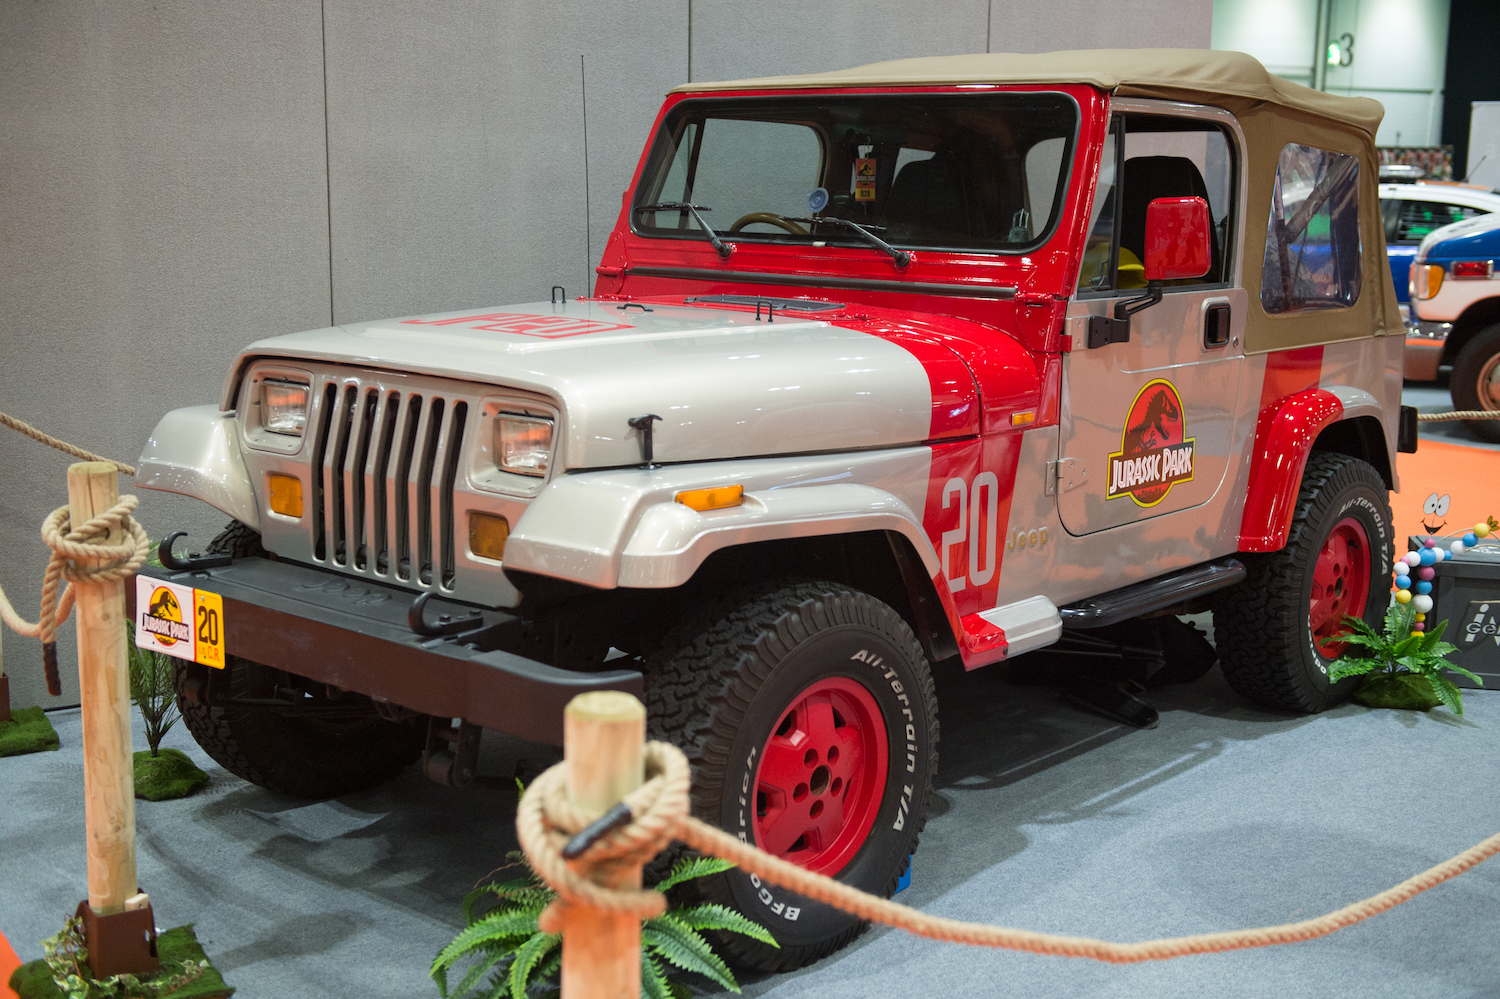 A tribute to the beige and red Jeep Wrangler YJ from 1993's Jurassic Park film.